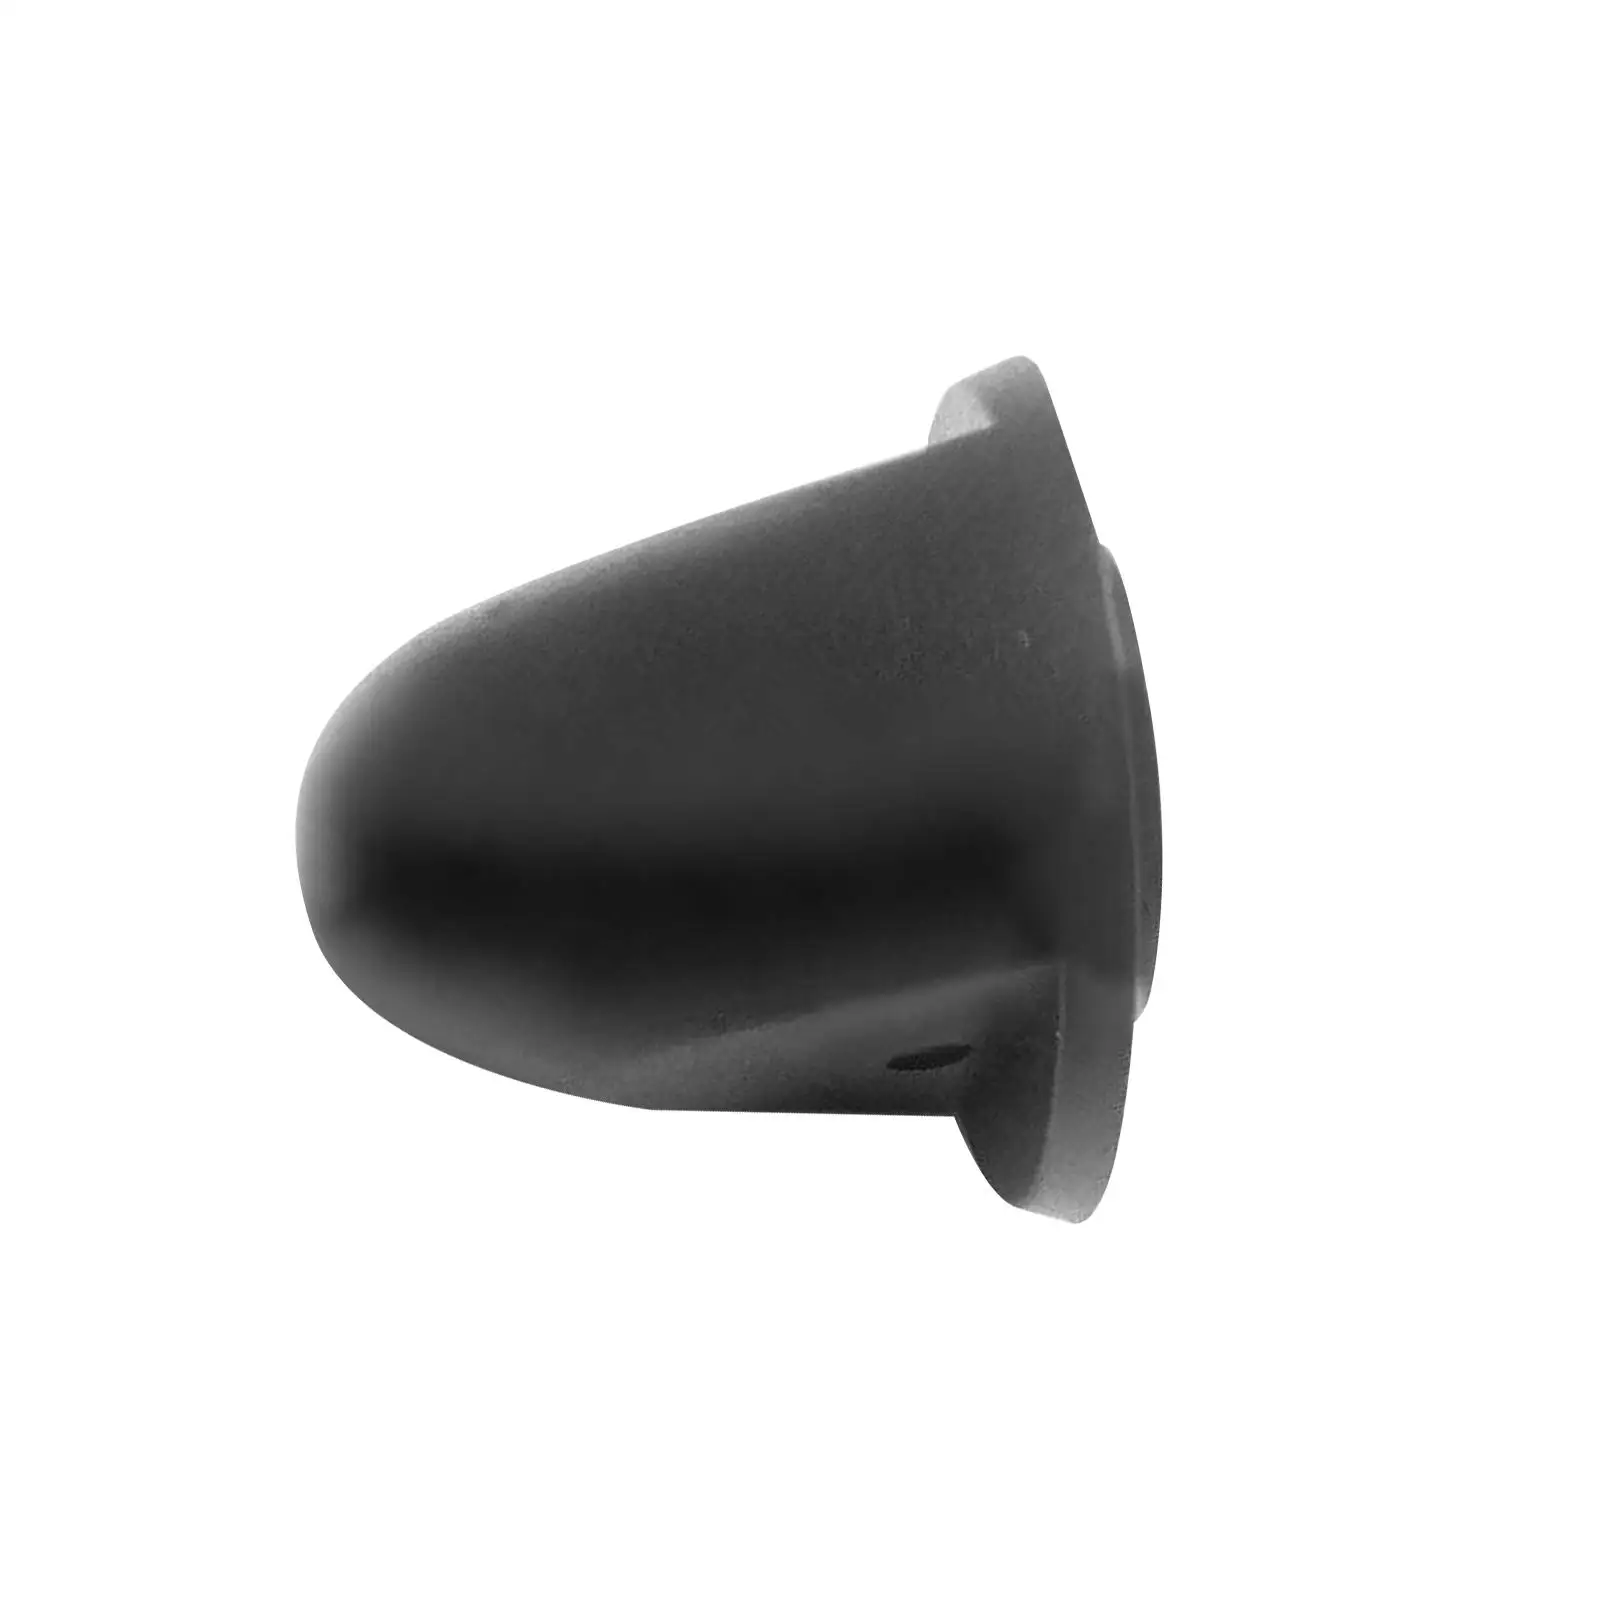 

Propeller Prop Nut 647-45616-02-00 for Yamaha Outboard Engine 4HP 5HP 2 Stroke Easily to Install Engine Parts Durable